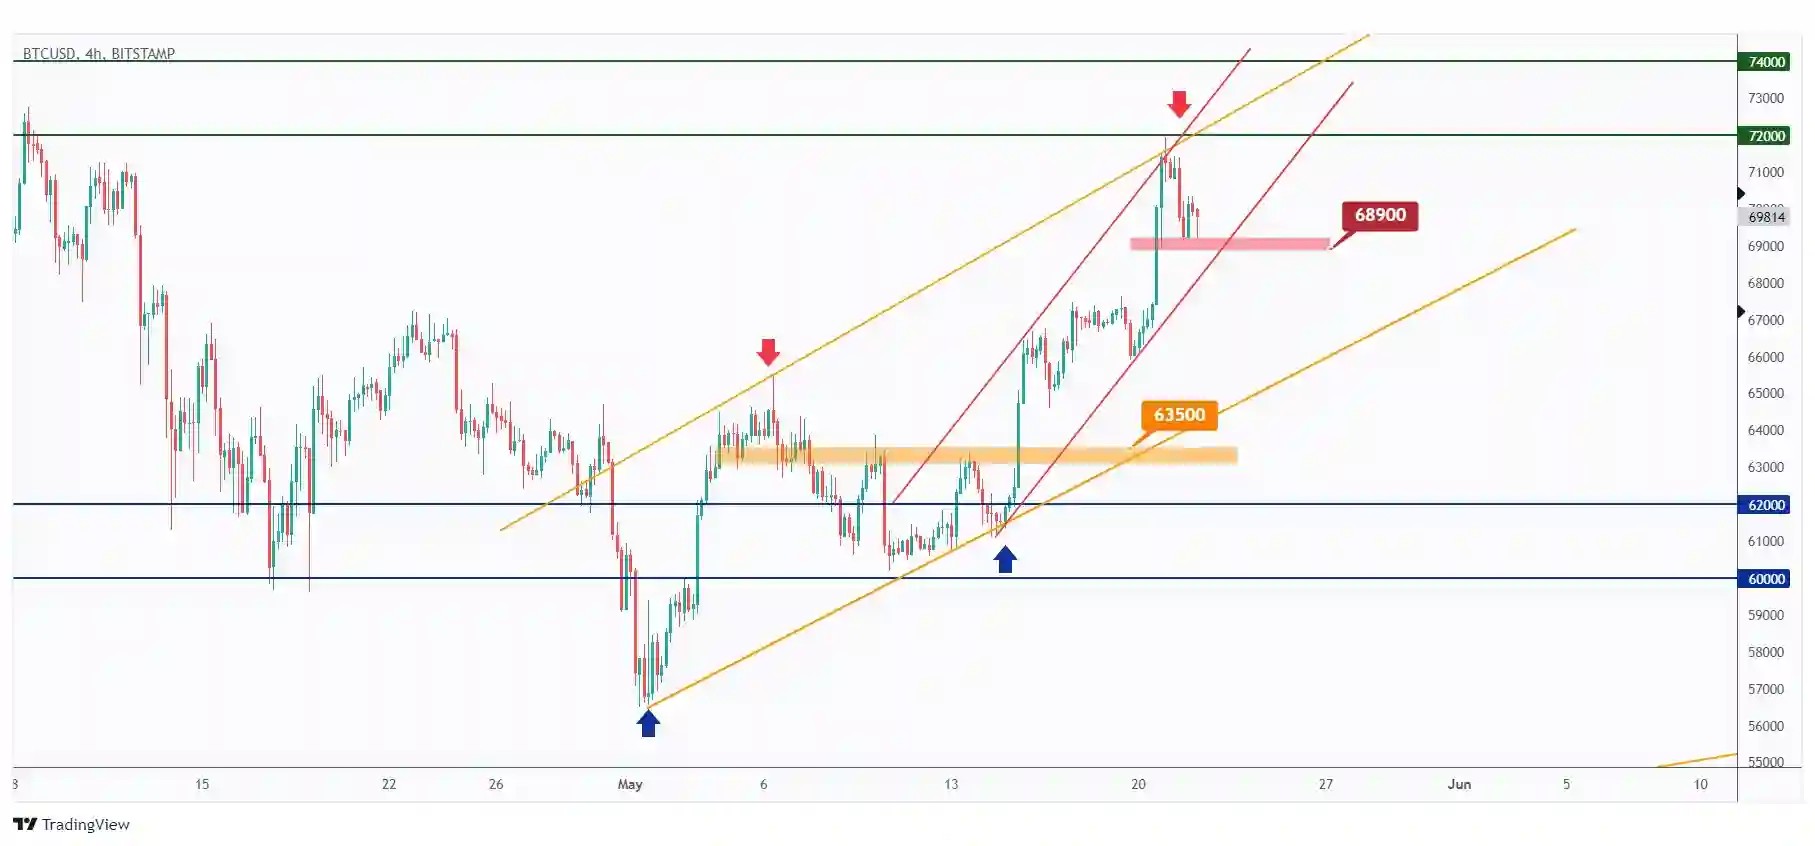 BTC 4h chart overall bullish trading within the rising channel as long as the last low at $68,900 holds.